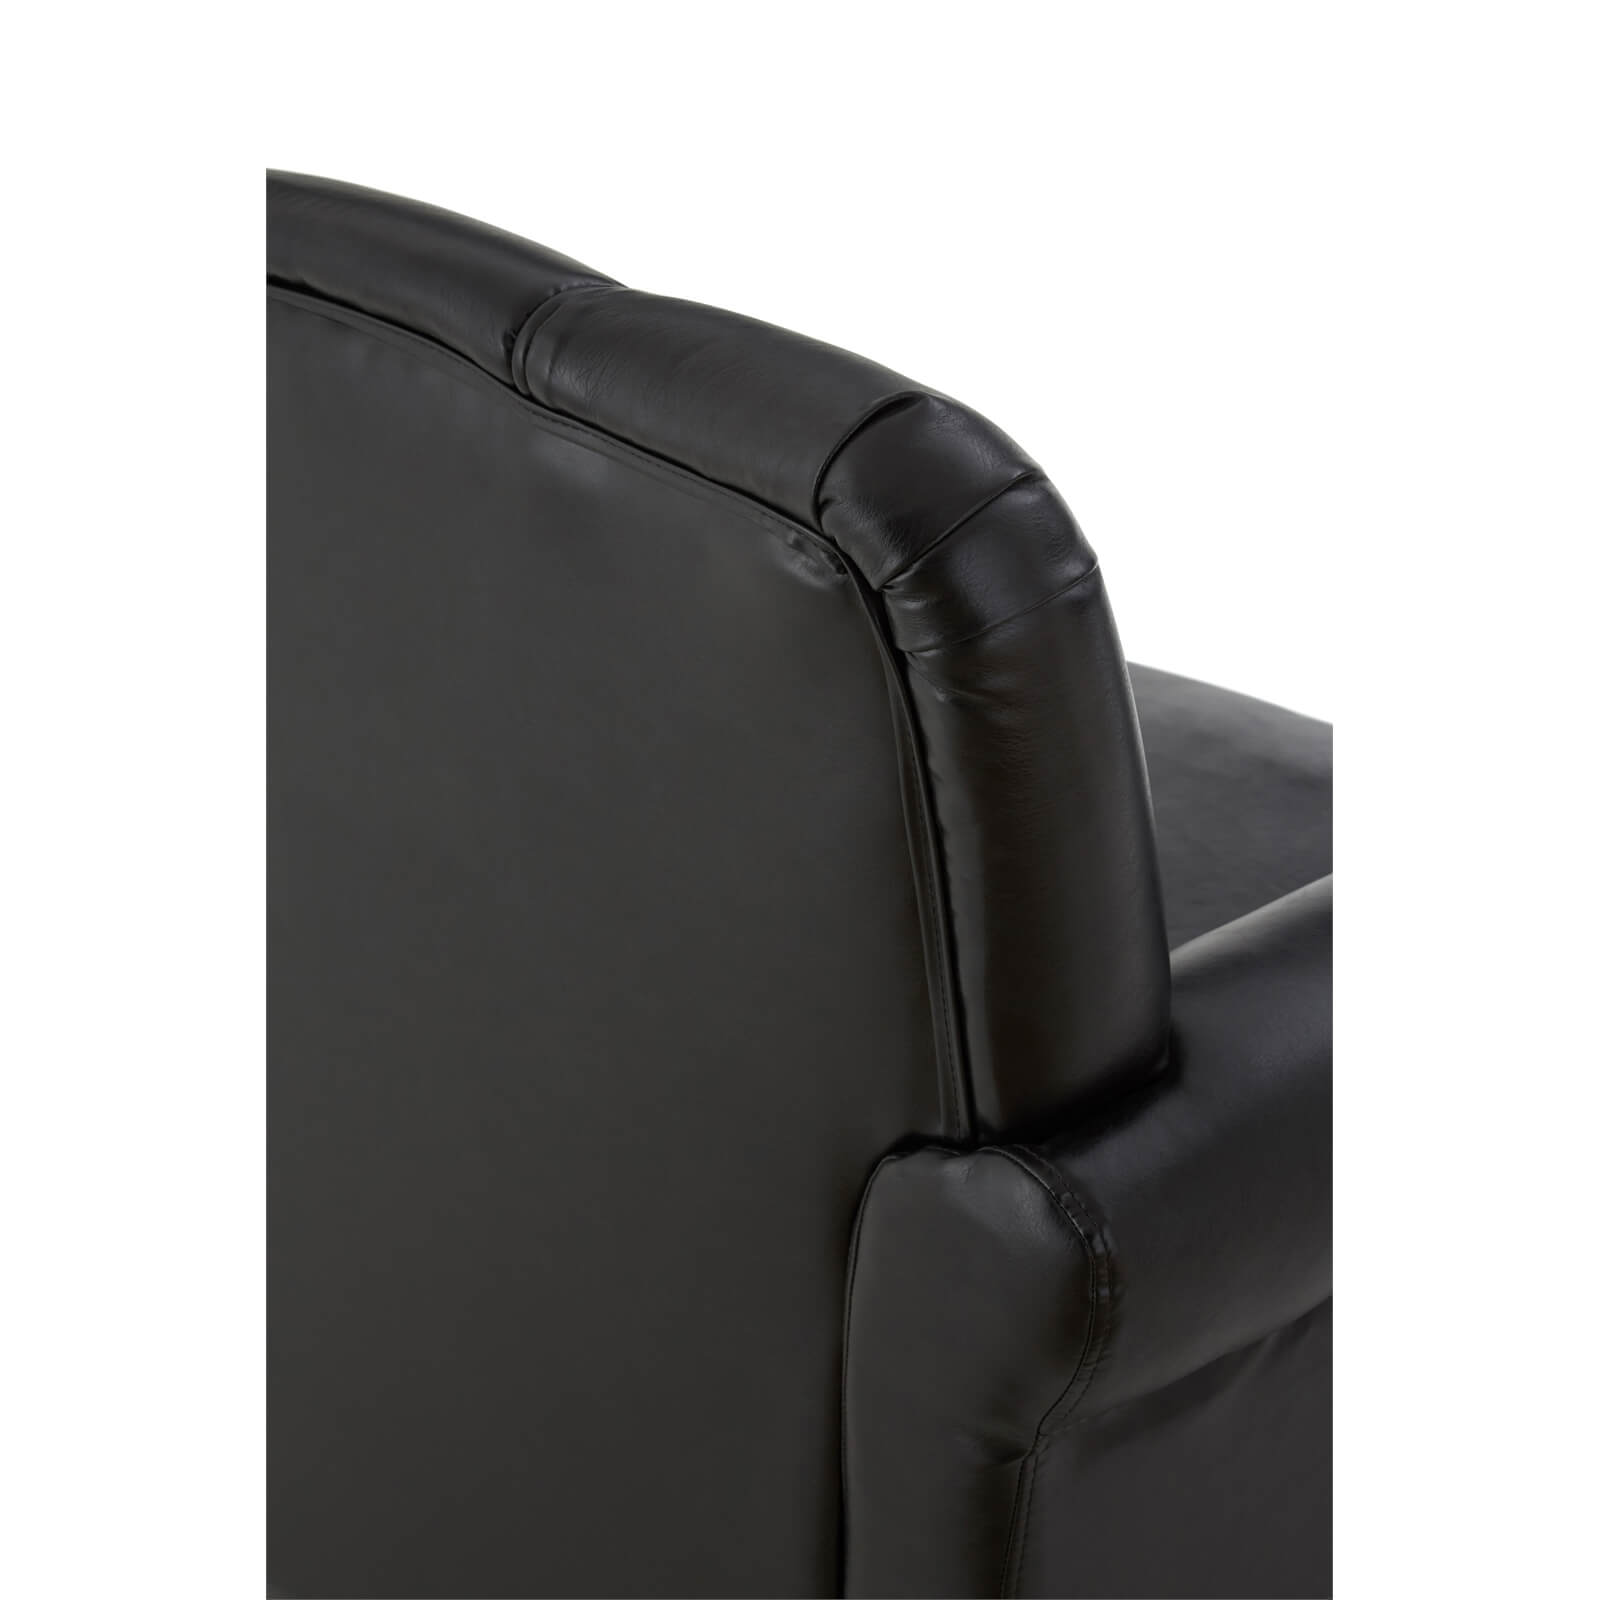 Chesterfield Black Bonded Leather Chair